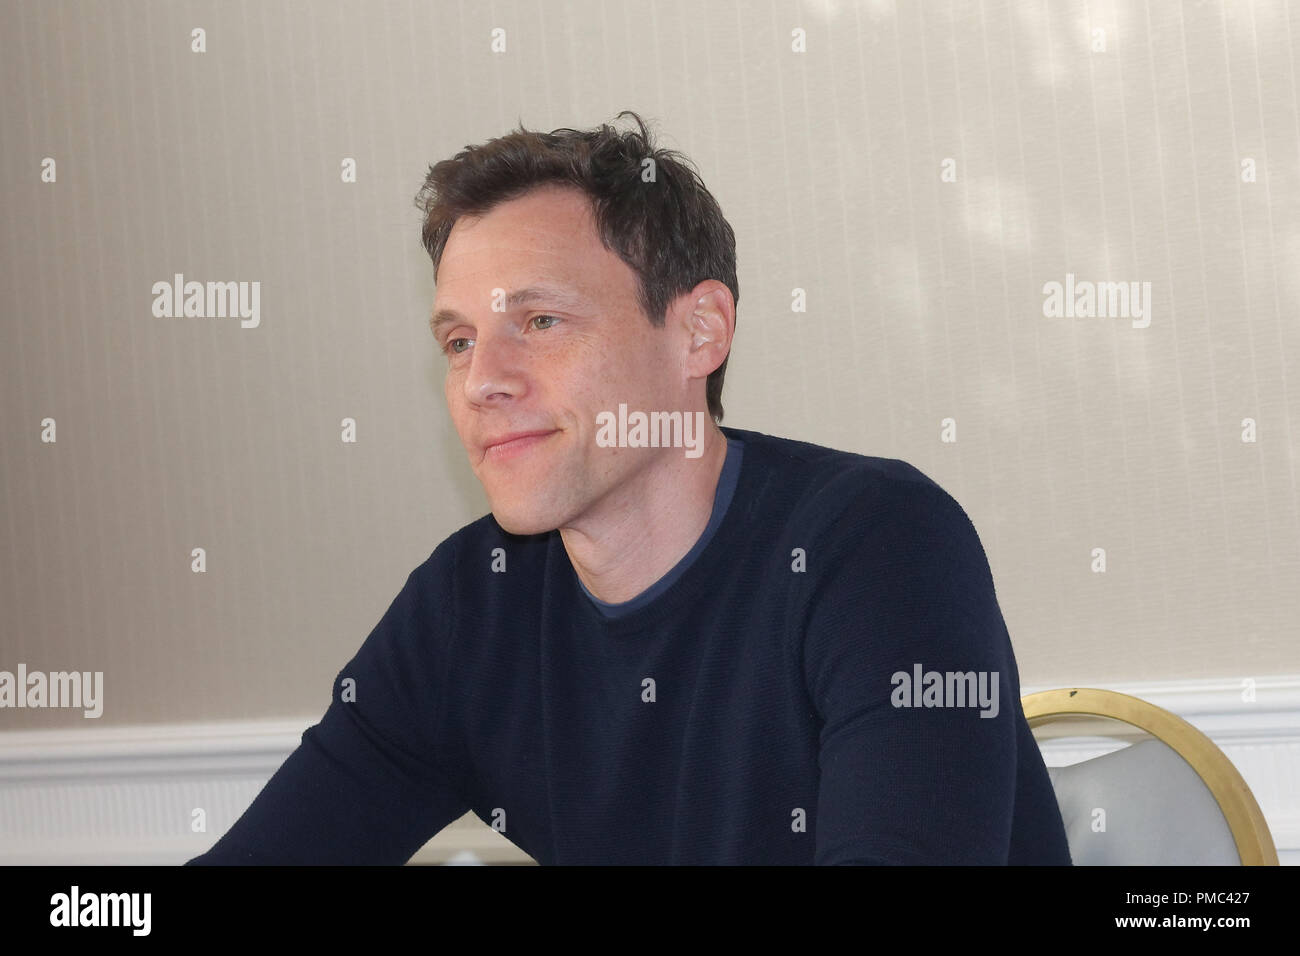 Will Gluck at 'Peter Rabbit' Press Conference held on February 2, 2018 at the Four Seasons Hotel in Beverly Hills,  California. No Tabloids. No USA sales for 30 days of origination. File Reference # 33531 004JRC  For Editorial Use Only -  All Rights Reserved Stock Photo